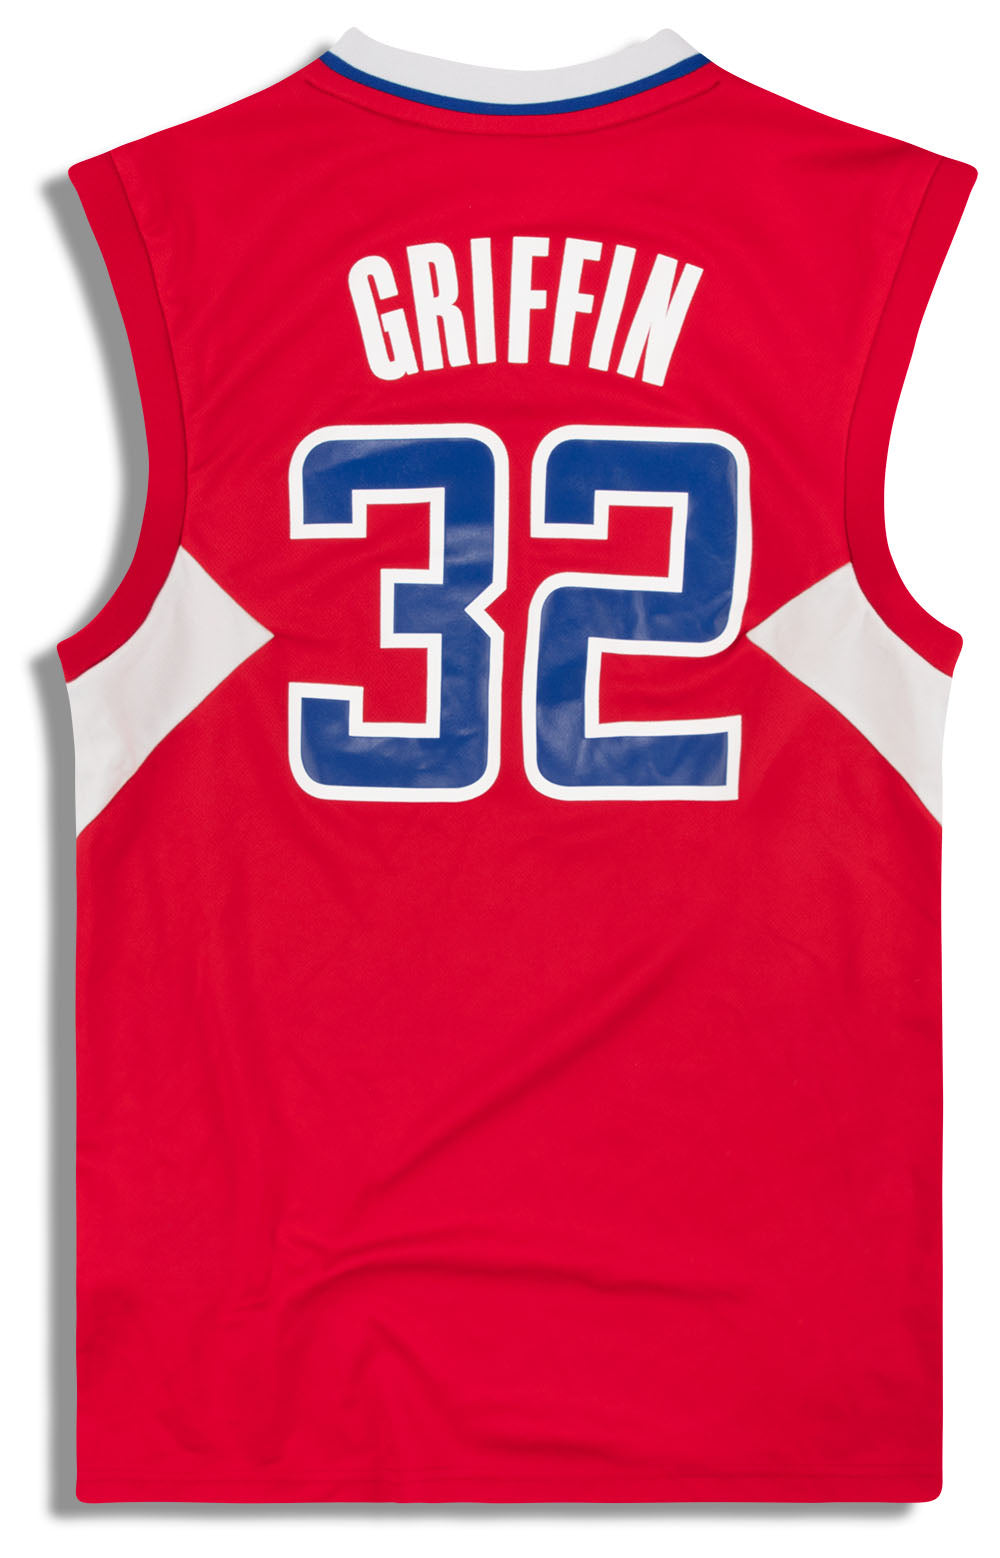 2010-14 LA CLIPPERS GRIFFIN #32 ADIDAS JERSEY (AWAY) L